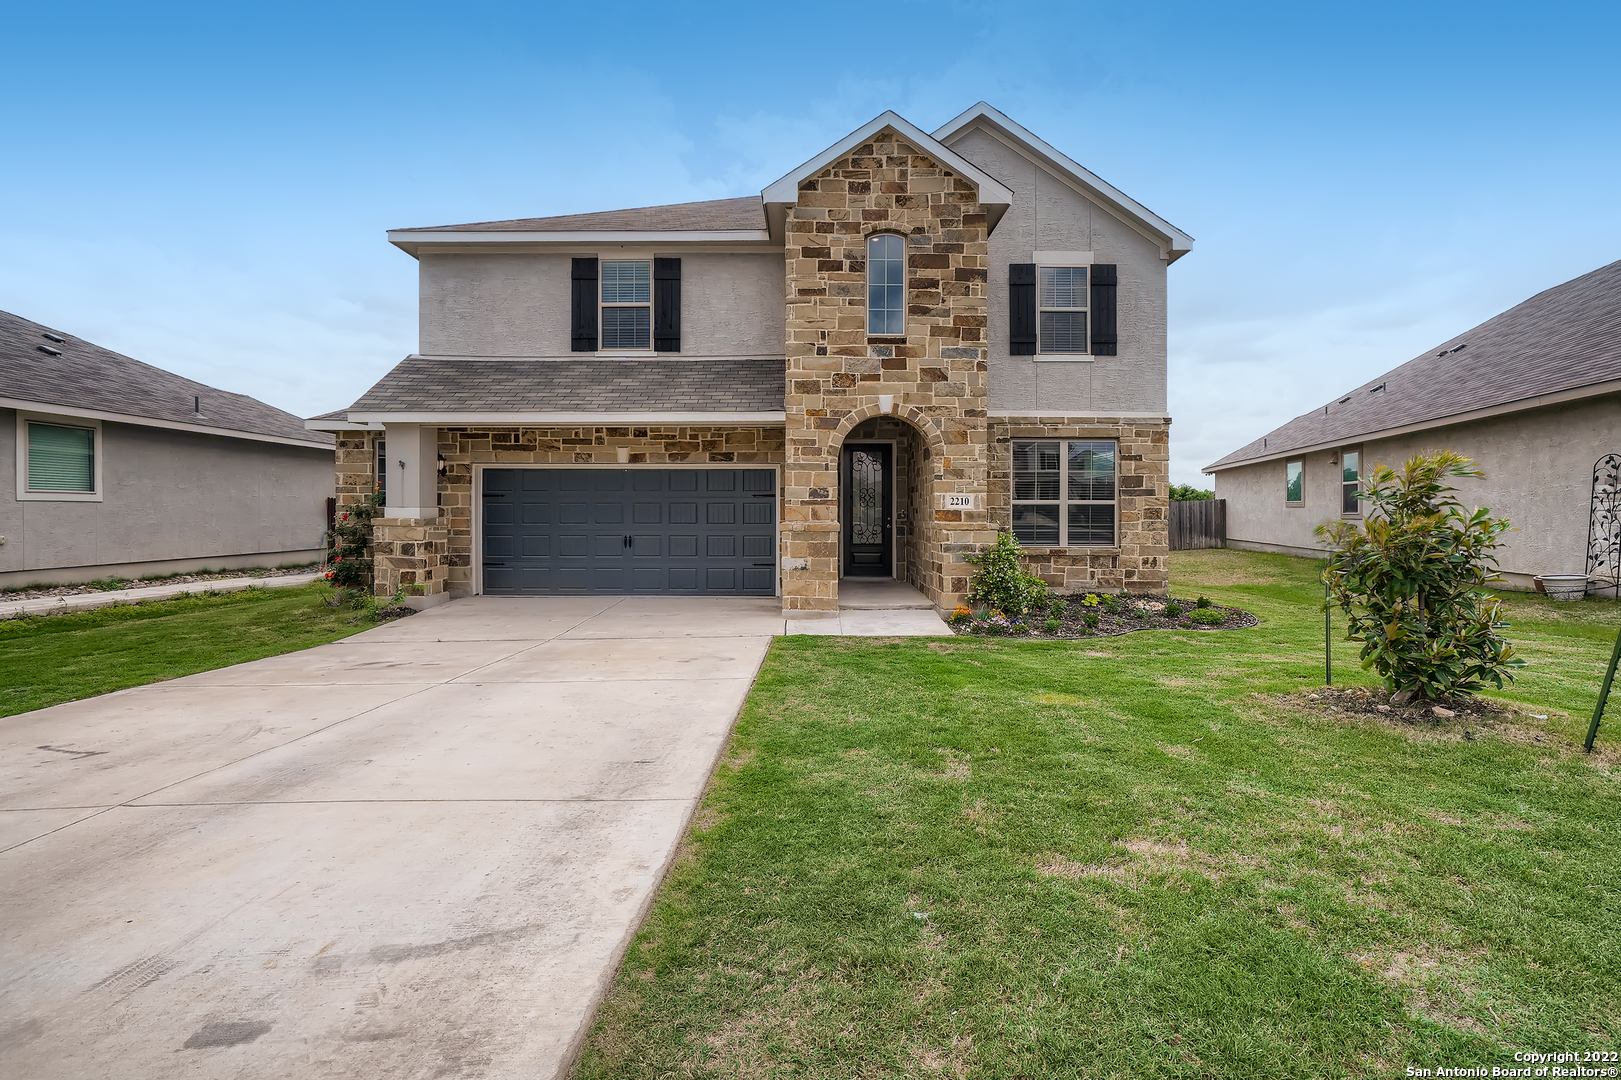 Click the Virtual Tour link to view the 3D Tour. Nestled in a nice cul-de-sac this gorgeous two story home was just built in 2019, has a greenbelt to the back, and is ideally located in NEISD with charter and private schools nearby, and with instant access to both highways 281 and 1604.  The house has many added on features, such as 27k in Solar Panels, high quality water softener with reverse osmosis filter in the kitchen, sturdy shelving and workspace in the oversized garage, as well as a storage shed in the back yard.  You'll first notice a beautifully manicured lawn kept up with the built in sprinkler system and backyard drip heads for the gardens. Step into the two story foyer and see a room that can easily be used as a dining or sitting room or an office! Enter a wide open floor plan with ample space provided by a large living room dining room combo overlooking the gorgeous kitchen. Beautiful cabinetry and large granite island coupled with a large breakfast bar and gleaming stainless steel appliances, including gas oven, make the kitchen an eye-catching feature. The expansive two-story living room features a gorgeous fireplace and numerous windows that floods the home with warm natural light. The first floor primary bedroom features high ceilings while the ensuite is impressive with a garden tub, his and her vanities, separate shower and two large walk-in closets. Head up stairs to check out not one but two extra living spaces to make your own! Four upstairs bedrooms and two full bathrooms ensure space for everyone's needs. Don't forget to head outside to the fenced in backyard and see the covered patio with built in gas line for your grill or outdoor fireplace.  Enjoy the beautiful Sienna neighborhood pool, playground, and community center during the hot Texas summers.